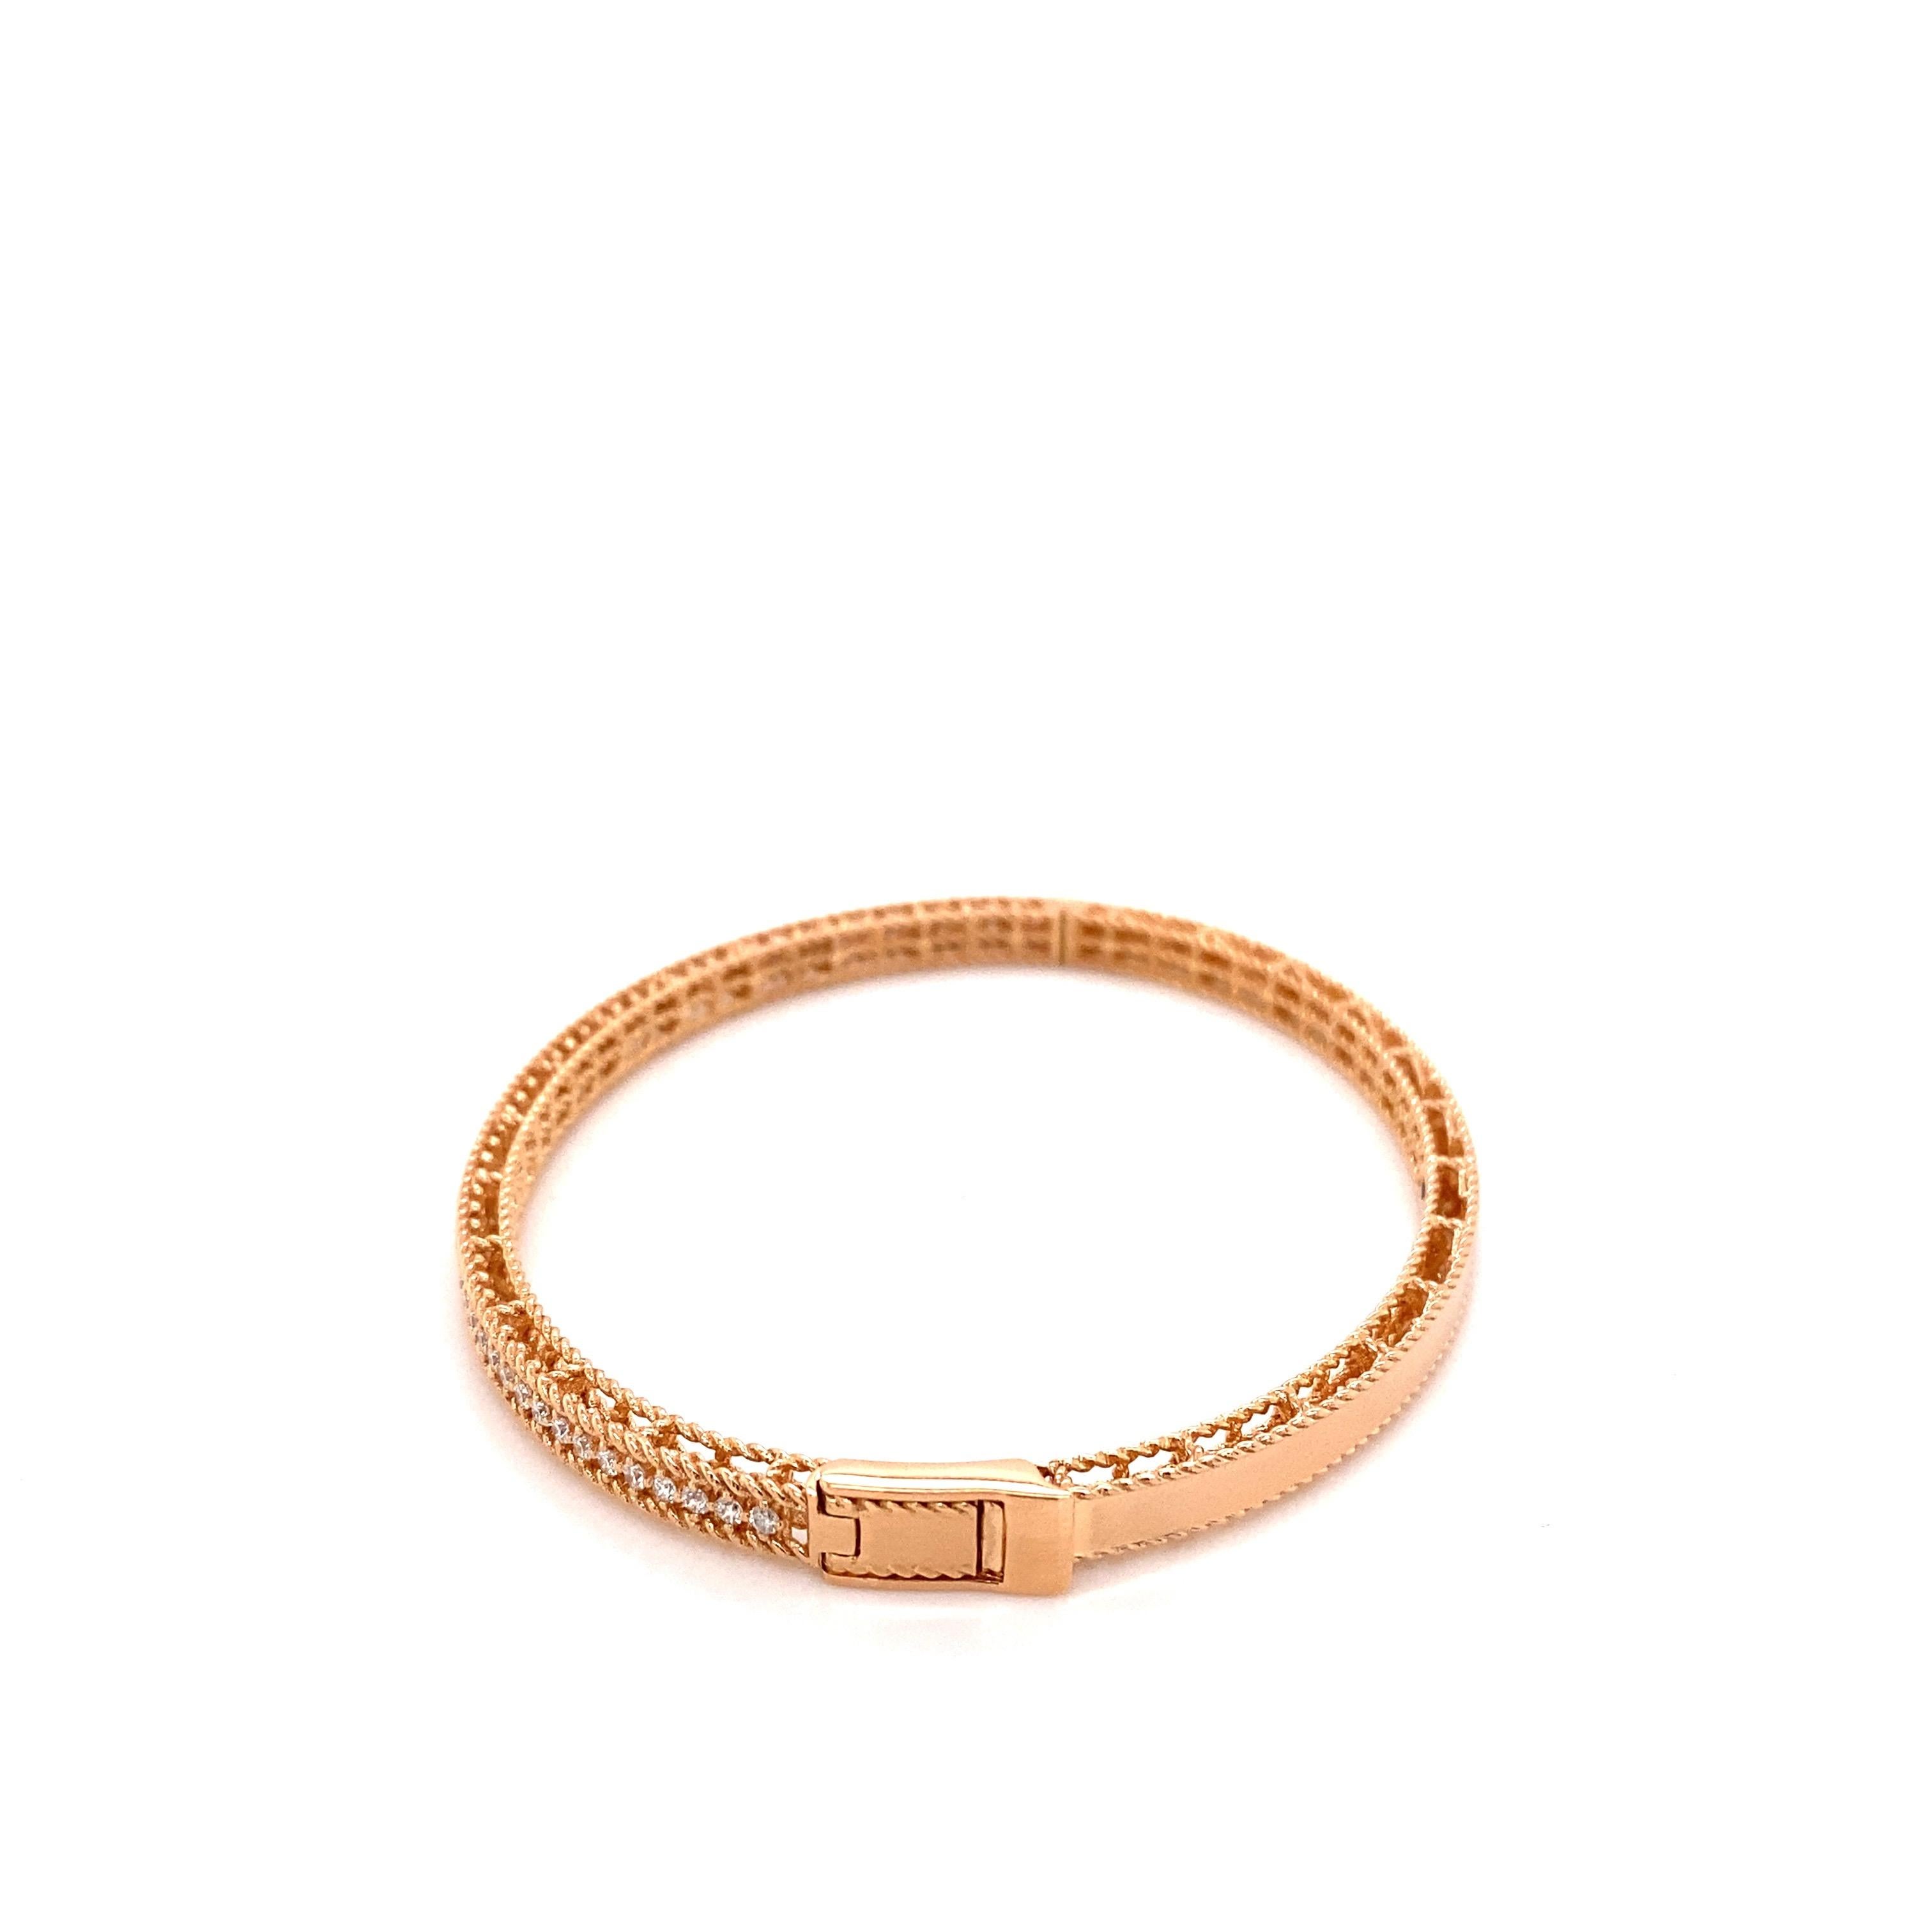 The symphony bracelet from Roberto Coin is crafted from 18 karat rose gold and features braided detailing, 0.61ct total weight in round diamonds, a small synthetic ruby set on the inside, and a hinged push-lock closure. This bracelet will fit up to